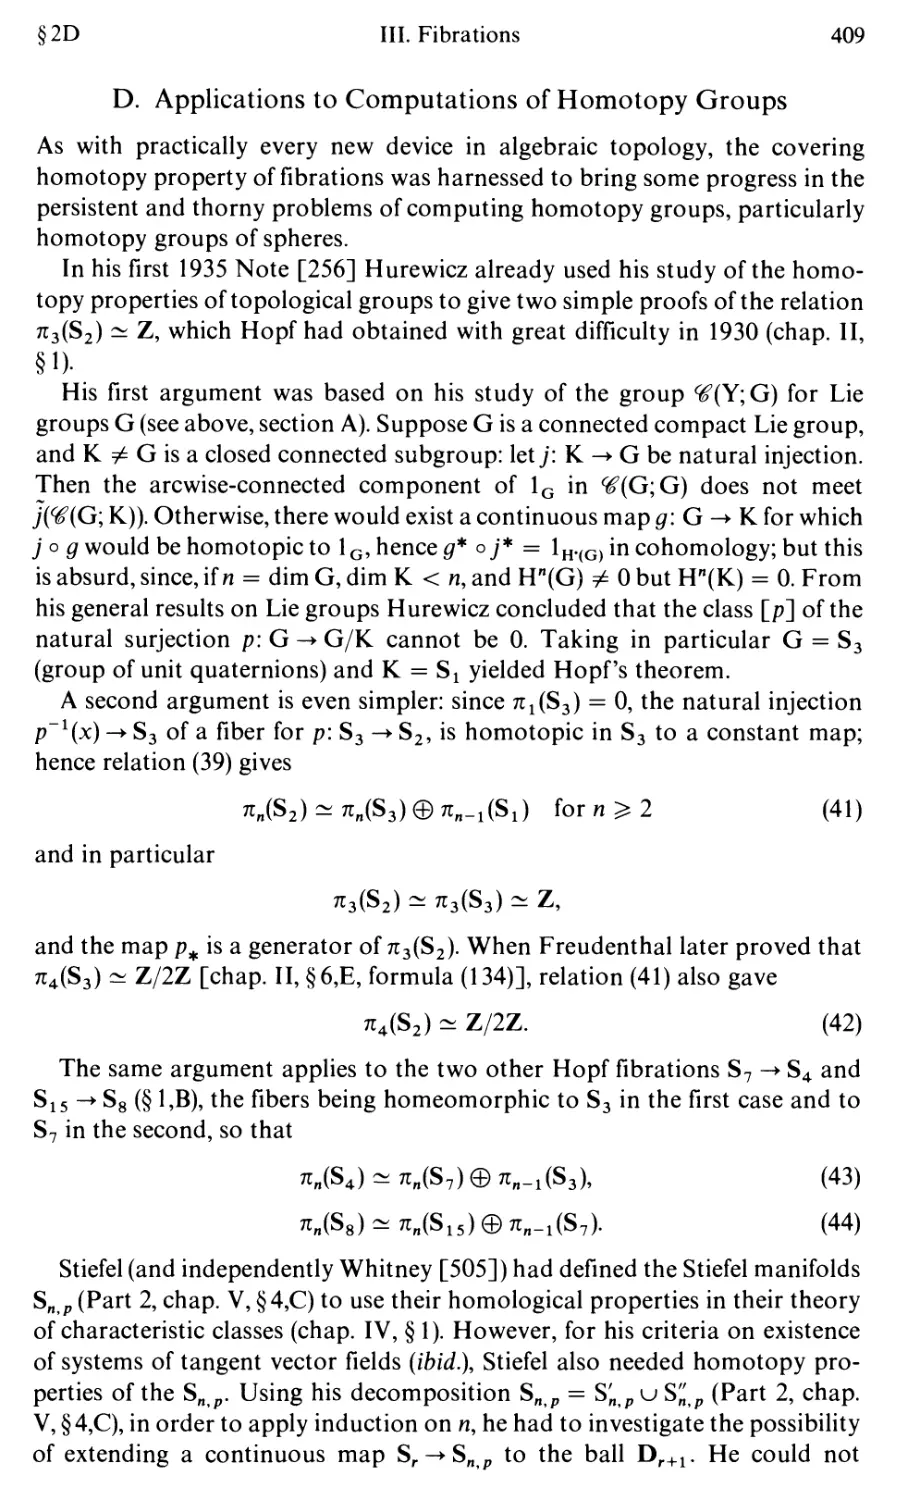 D. Applications to Computations of Homotopy Groups